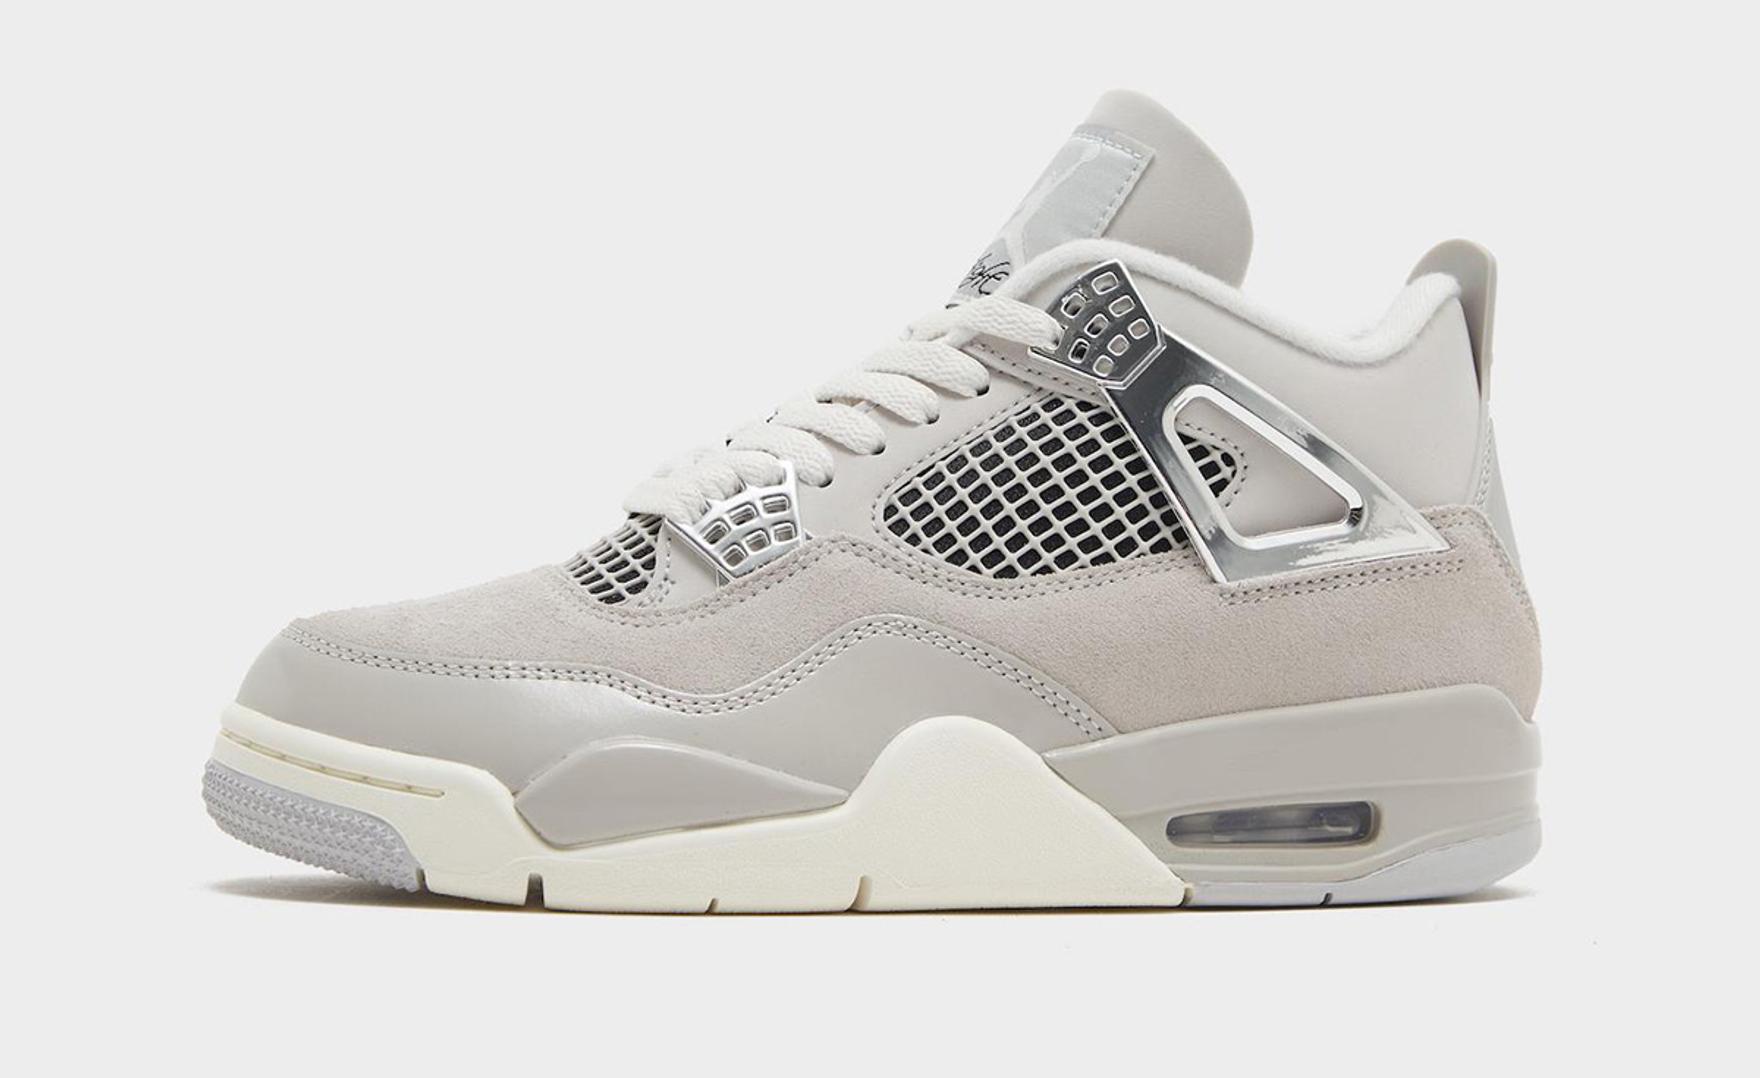 Where to Buy the Air Jordan 4 ‘Frozen Moments’